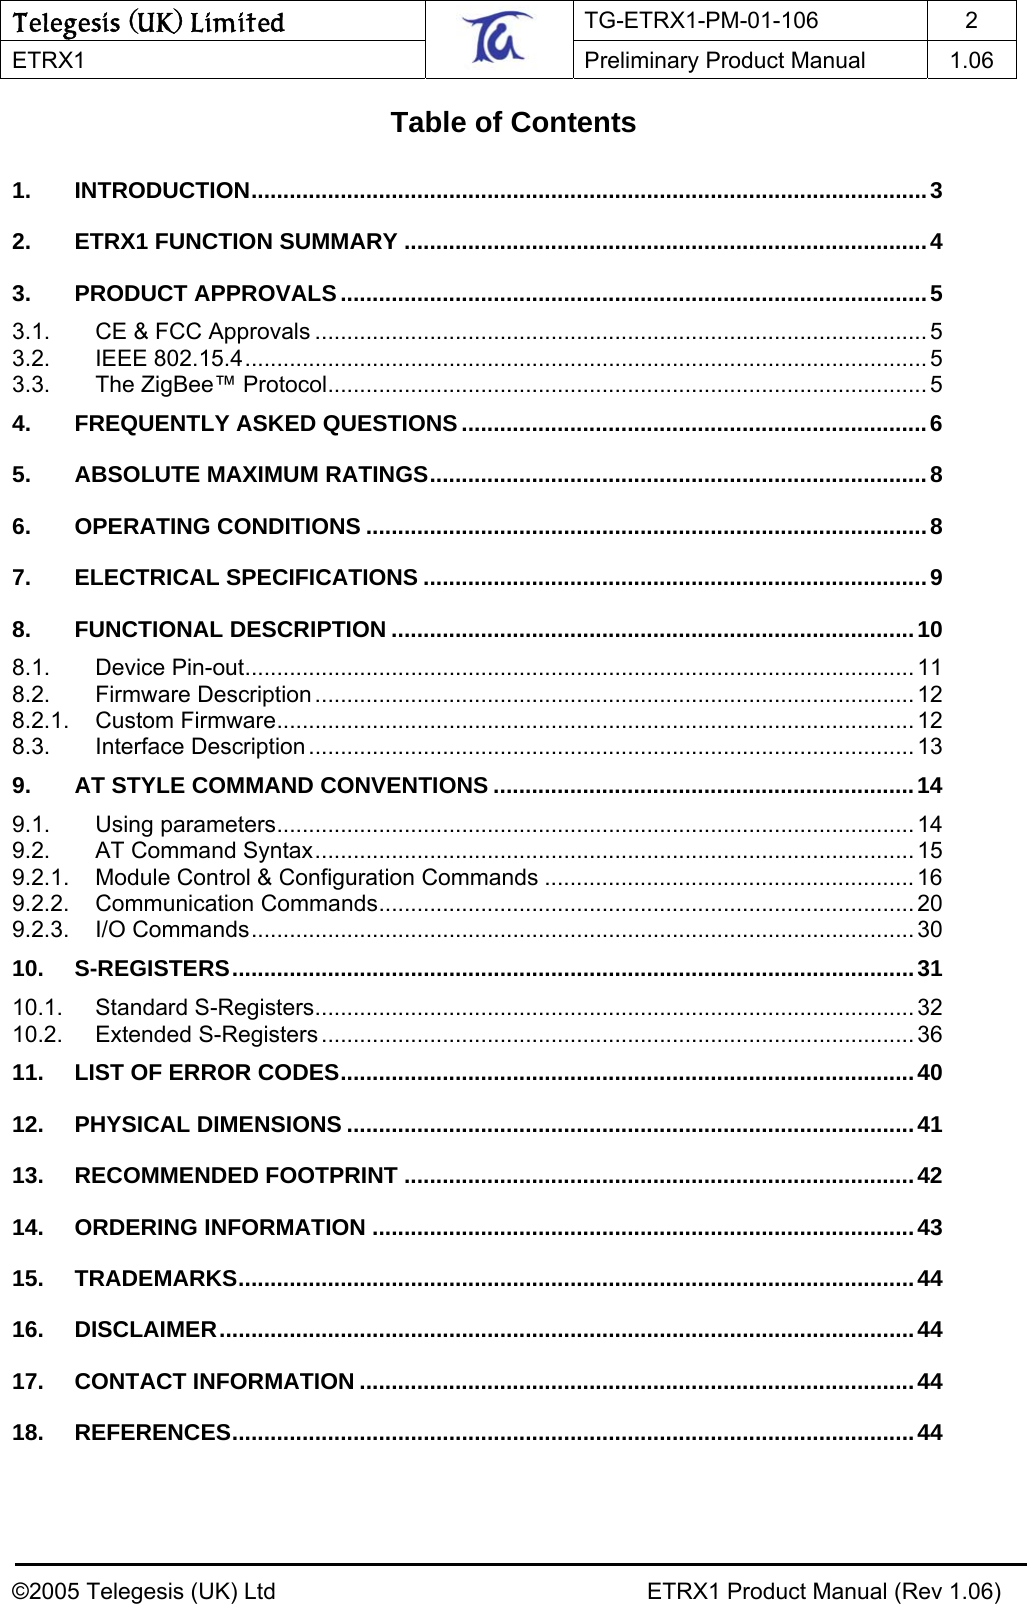 Telegesis (UK) Limited TG-ETRX1-PM-01-106 2  ETRX1    Preliminary Product Manual  1.06   Table of Contents  1. INTRODUCTION..........................................................................................................3 2. ETRX1 FUNCTION SUMMARY ..................................................................................4 3. PRODUCT APPROVALS ............................................................................................5 3.1. CE &amp; FCC Approvals ................................................................................................ 5 3.2. IEEE 802.15.4........................................................................................................... 5 3.3. The ZigBee™ Protocol.............................................................................................. 5 4. FREQUENTLY ASKED QUESTIONS .........................................................................6 5. ABSOLUTE MAXIMUM RATINGS..............................................................................8 6. OPERATING CONDITIONS ........................................................................................8 7. ELECTRICAL SPECIFICATIONS ...............................................................................9 8. FUNCTIONAL DESCRIPTION ..................................................................................10 8.1. Device Pin-out ......................................................................................................... 11 8.2. Firmware Description .............................................................................................. 12 8.2.1. Custom Firmware.................................................................................................... 12 8.3. Interface Description............................................................................................... 13 9. AT STYLE COMMAND CONVENTIONS ..................................................................14 9.1. Using parameters.................................................................................................... 14 9.2. AT Command Syntax.............................................................................................. 15 9.2.1. Module Control &amp; Configuration Commands .......................................................... 16 9.2.2. Communication Commands.................................................................................... 20 9.2.3. I/O Commands........................................................................................................ 30 10. S-REGISTERS...........................................................................................................31 10.1. Standard S-Registers.............................................................................................. 32 10.2. Extended S-Registers ............................................................................................. 36 11. LIST OF ERROR CODES..........................................................................................40 12. PHYSICAL DIMENSIONS .........................................................................................41 13. RECOMMENDED FOOTPRINT ................................................................................42 14. ORDERING INFORMATION .....................................................................................43 15. TRADEMARKS..........................................................................................................44 16. DISCLAIMER.............................................................................................................44 17. CONTACT INFORMATION .......................................................................................44 18. REFERENCES...........................................................................................................44  ©2005 Telegesis (UK) Ltd    ETRX1 Product Manual (Rev 1.06) 